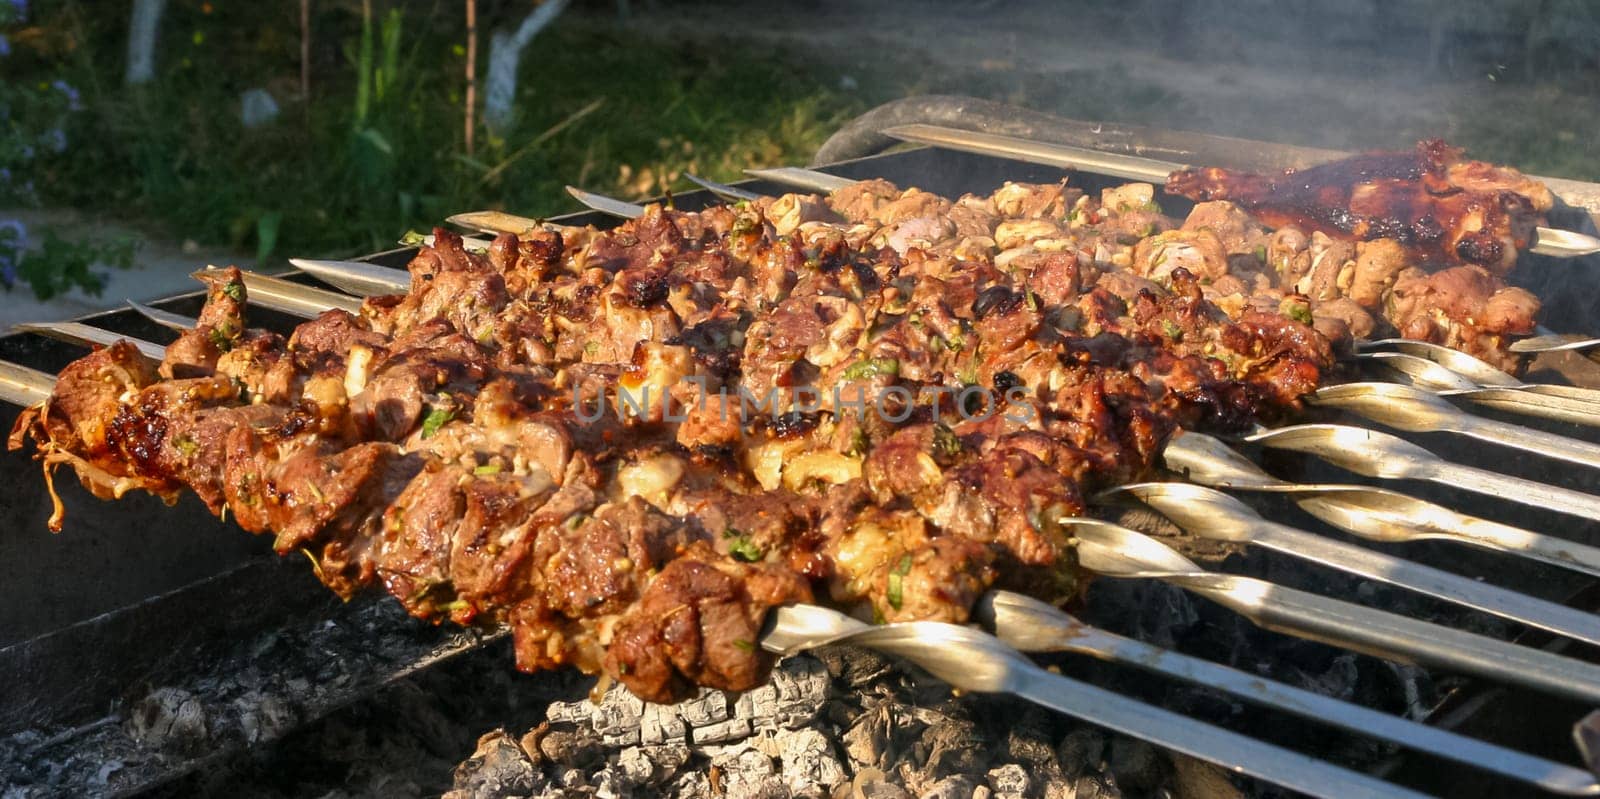 Pork Meat on skewers grilled on the grill, delicious food